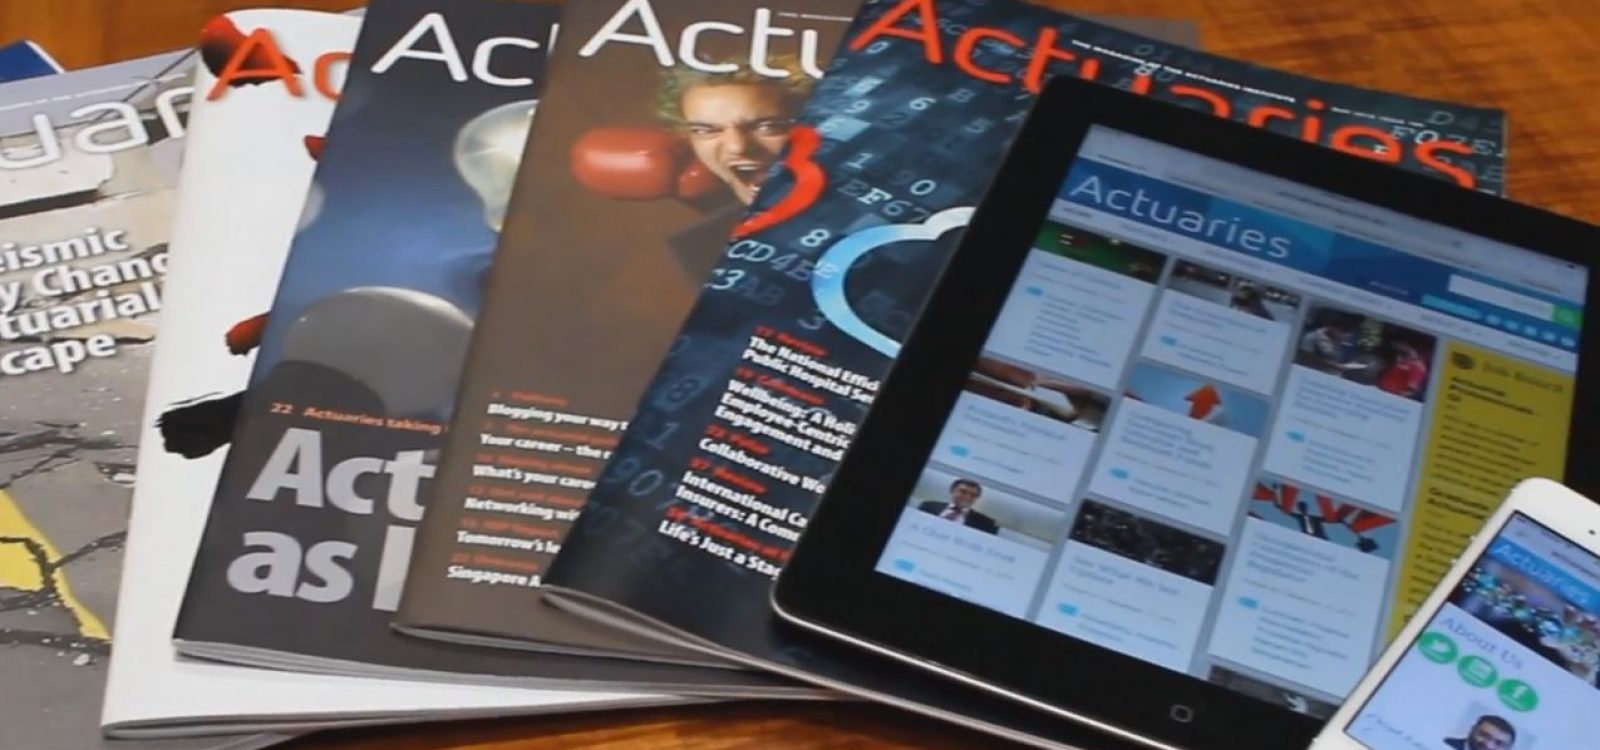 Welcome to Actuaries Digital